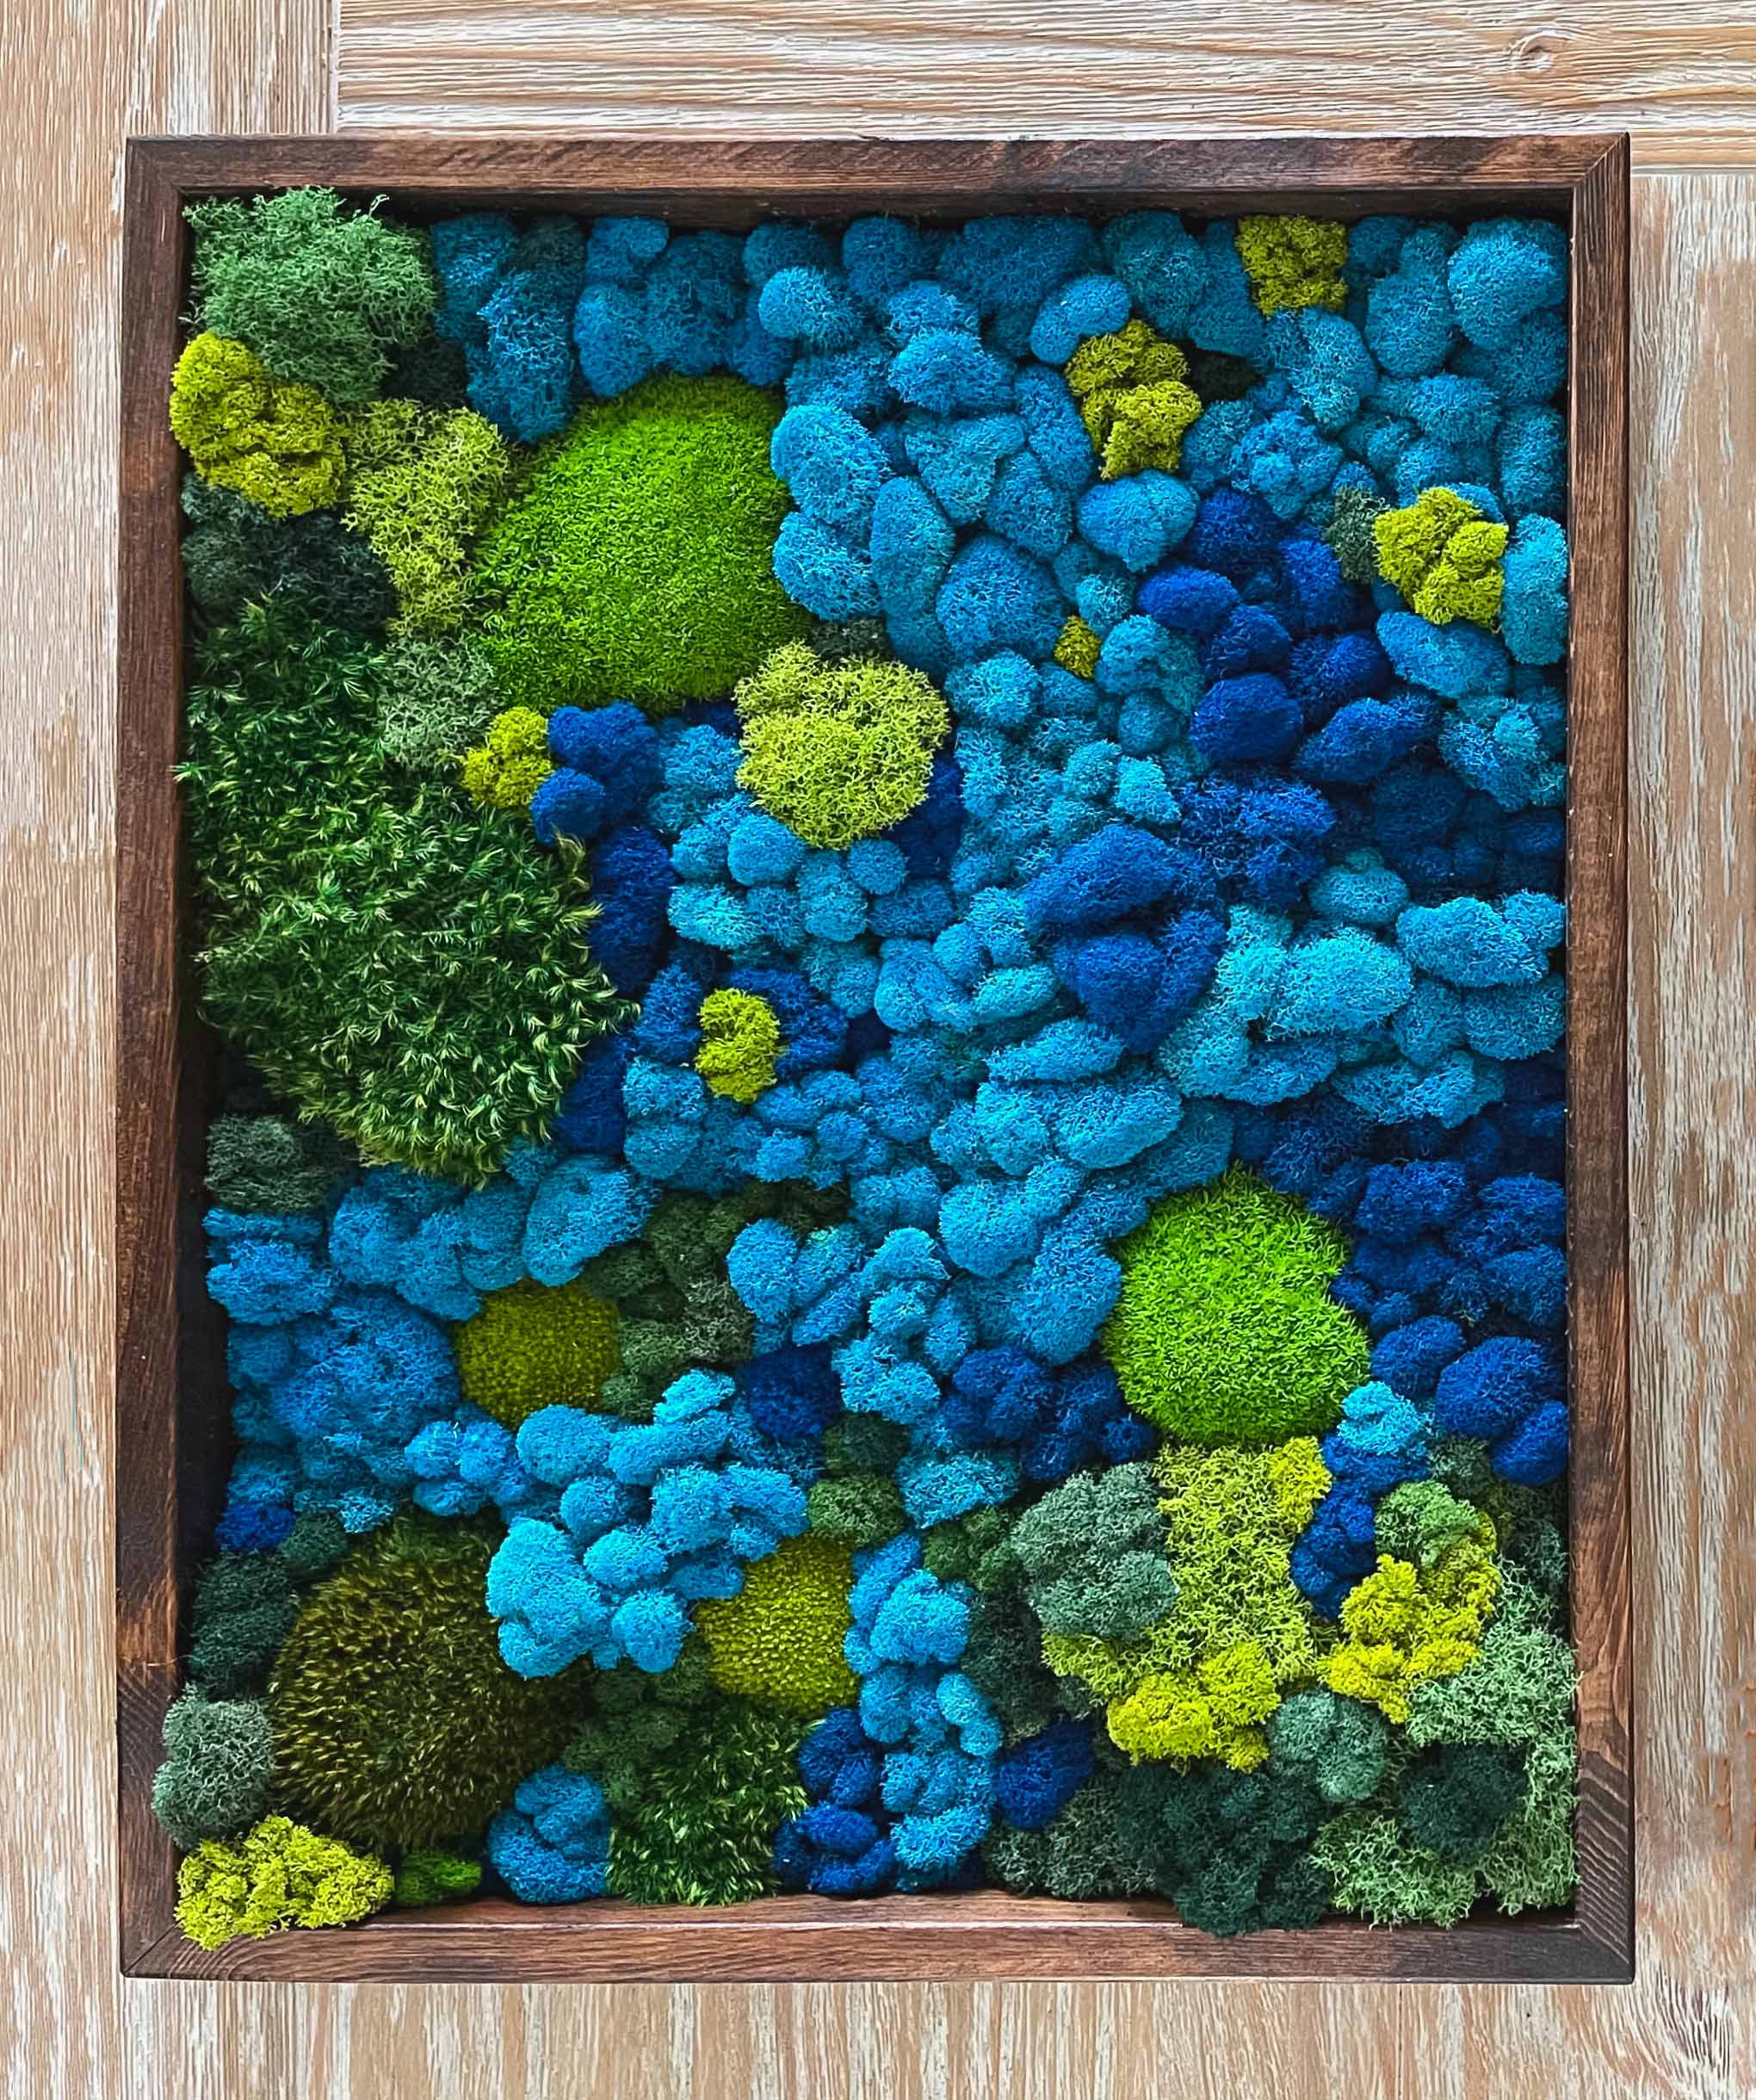 Image of a colorful Om Grown Piece, featuring Azul Reindeer Moss